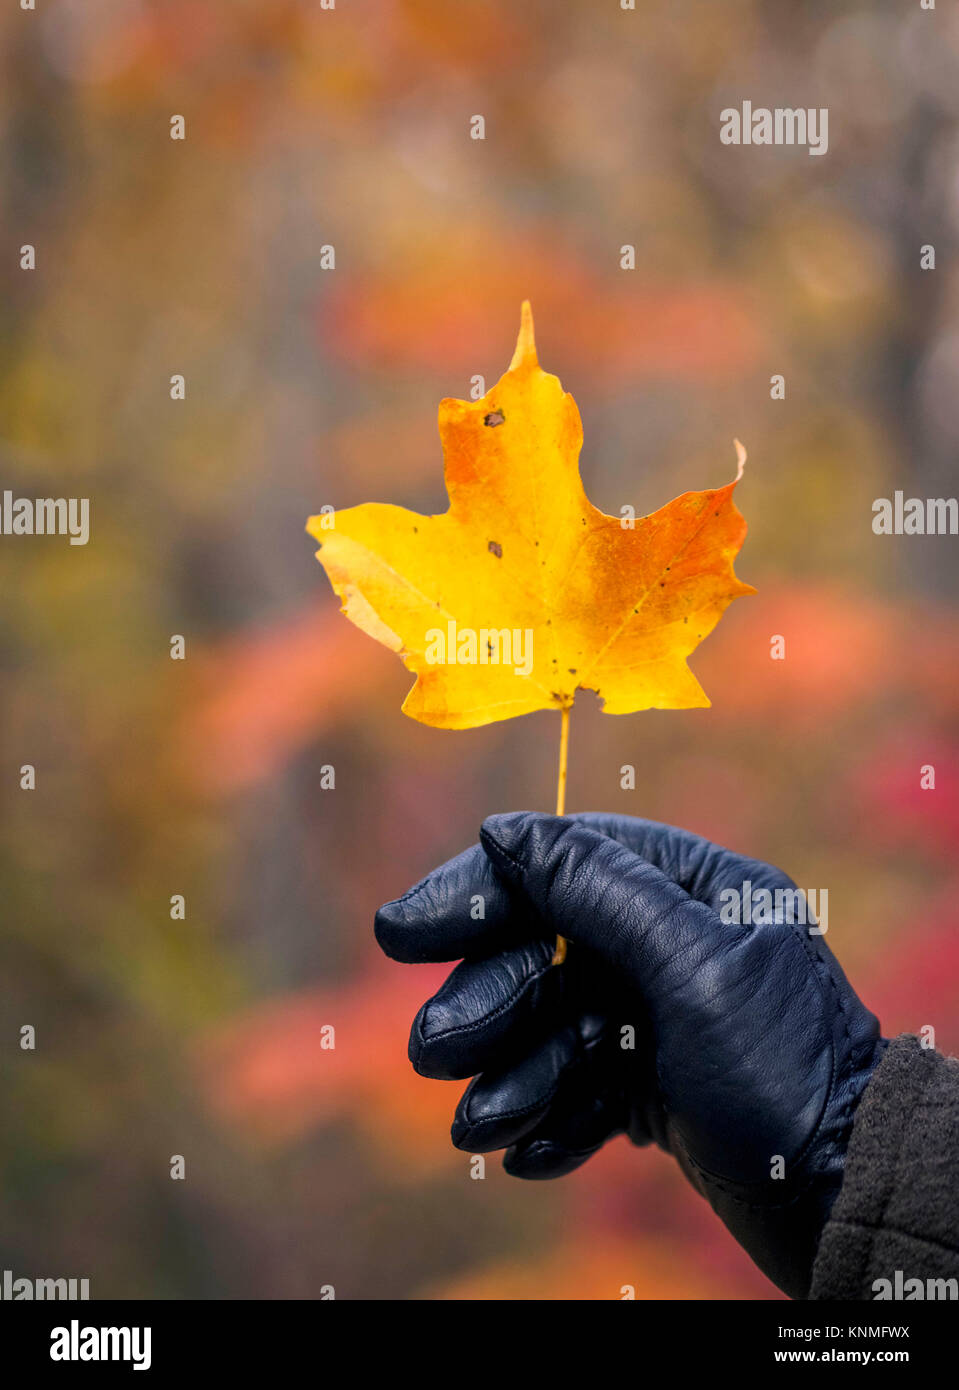 An orange maple leaf held by a lady wearing black leather glove in autumn weather. The leaf is shown in isolated fashion, i.e. bokeh effect. Stock Photo